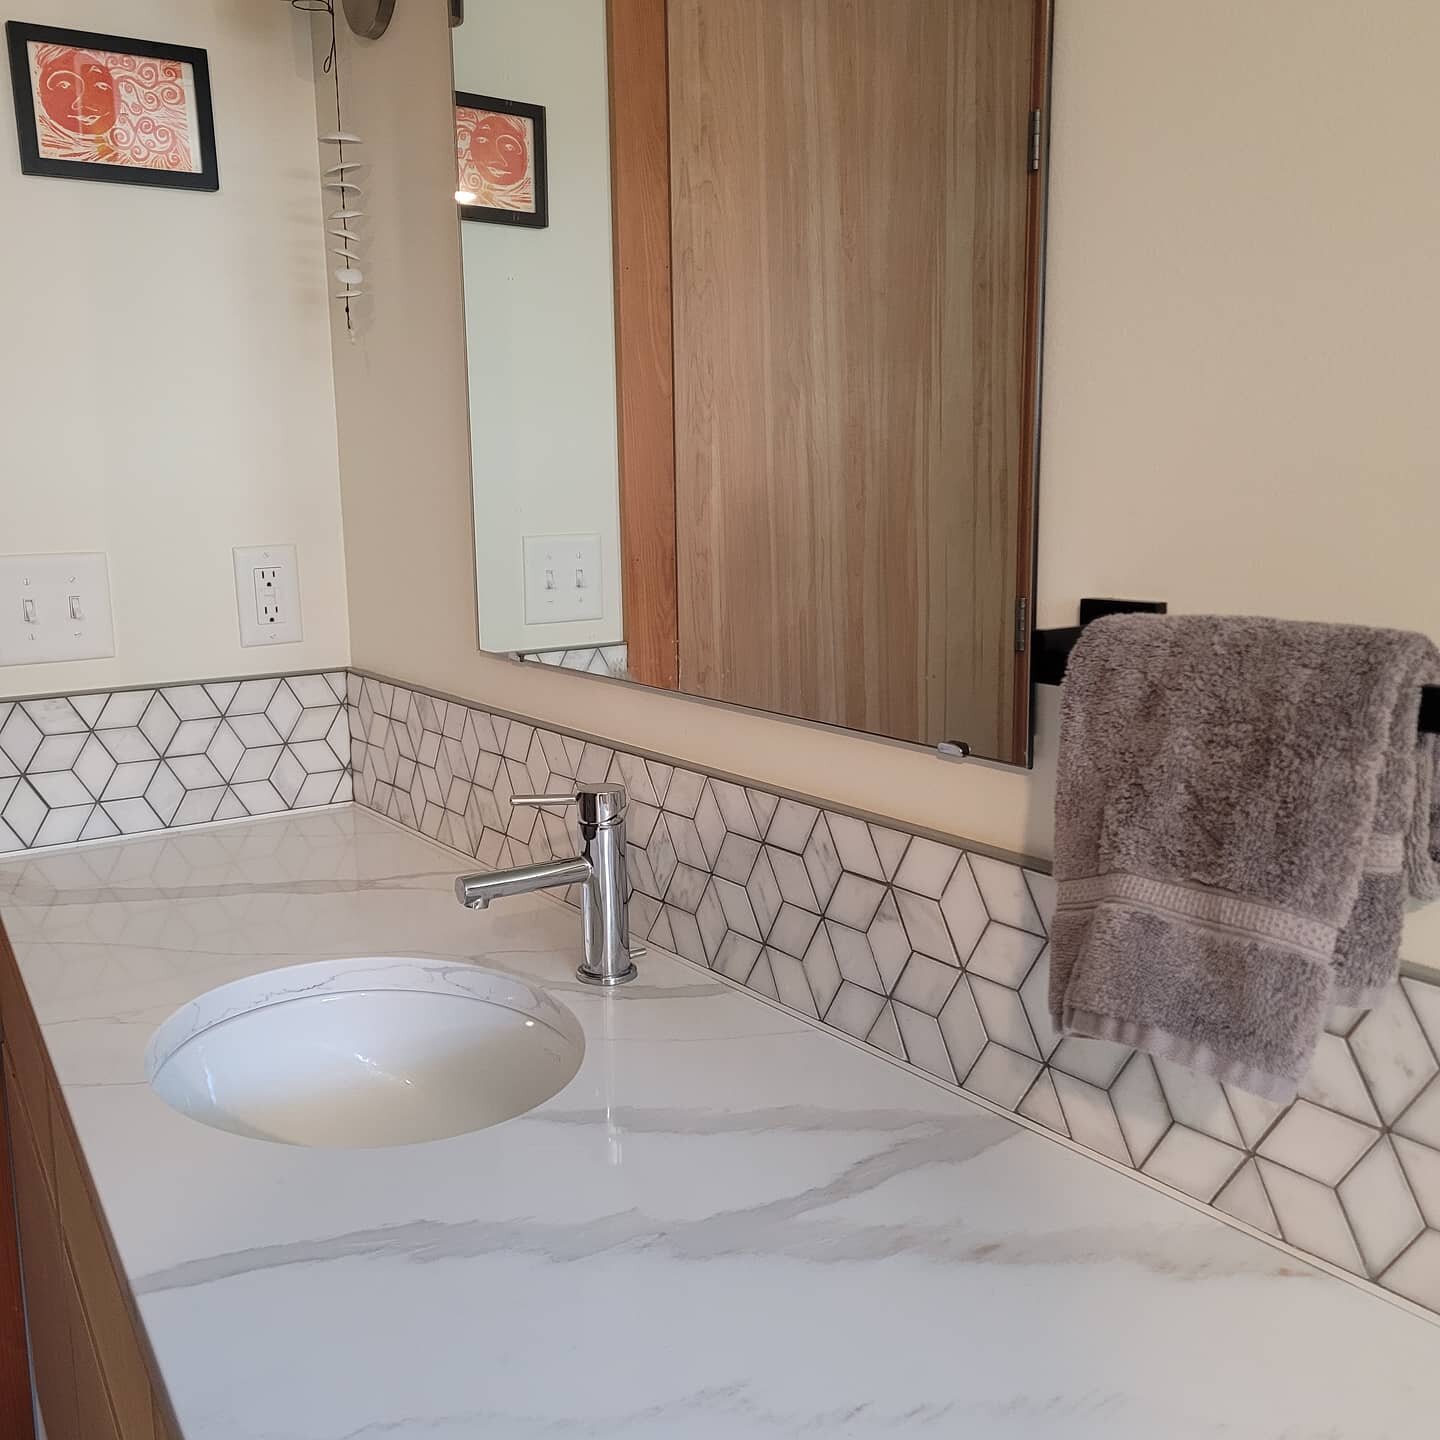 Last week's cubicle. 
Zoom into the corner to see the magic! And oh, what a difference grout makes!
Thank you @sustainable_building_design for the diamond marble challenge! 

#tubsurround #marbletile #fildi #marblechallenge #joyceoftile #beautifulbat